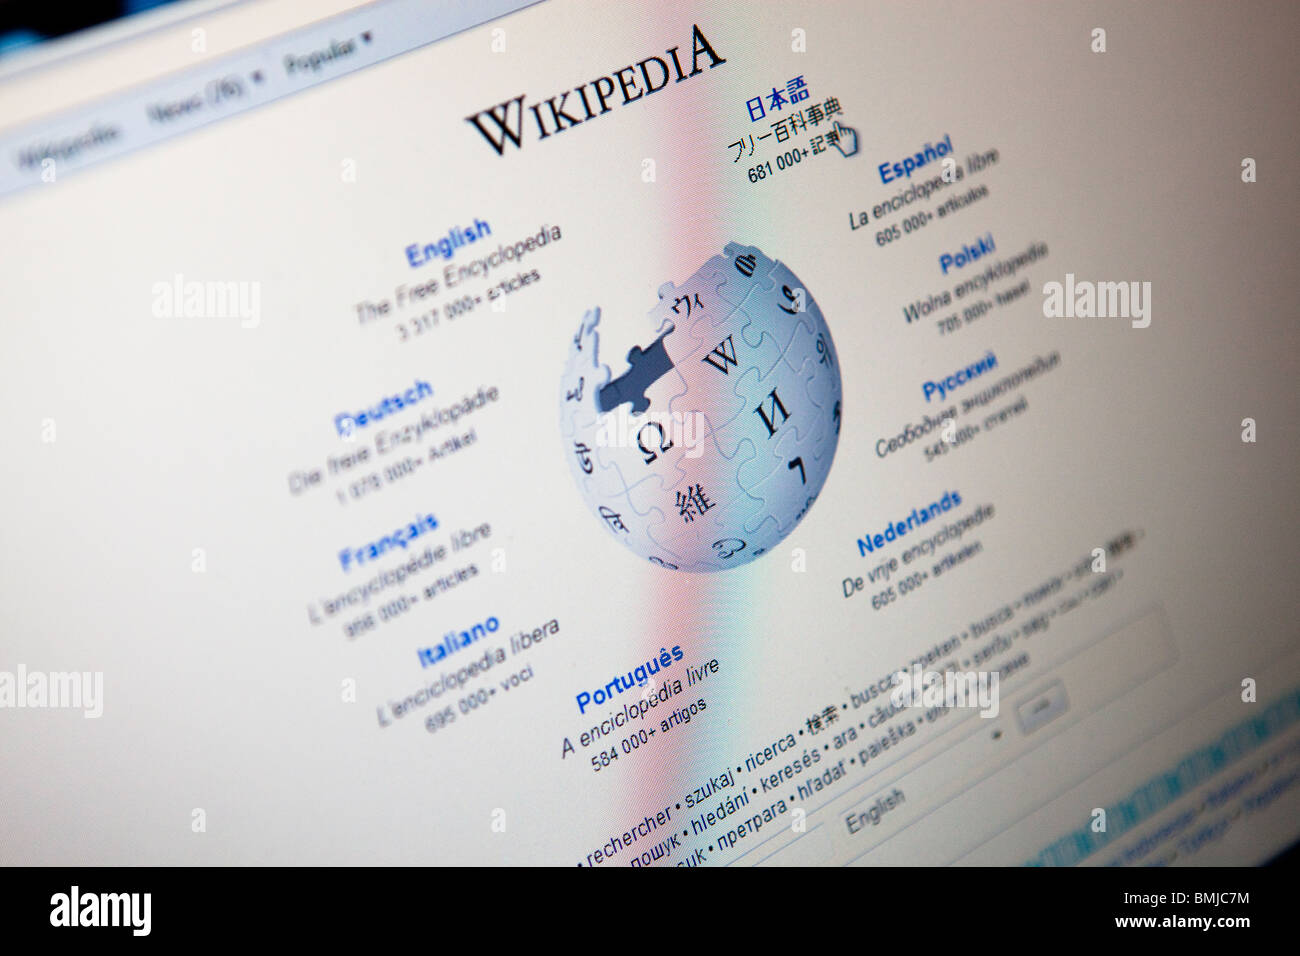 Close up of a computer monitor / screen showing the website Wikipedia Stock Photo